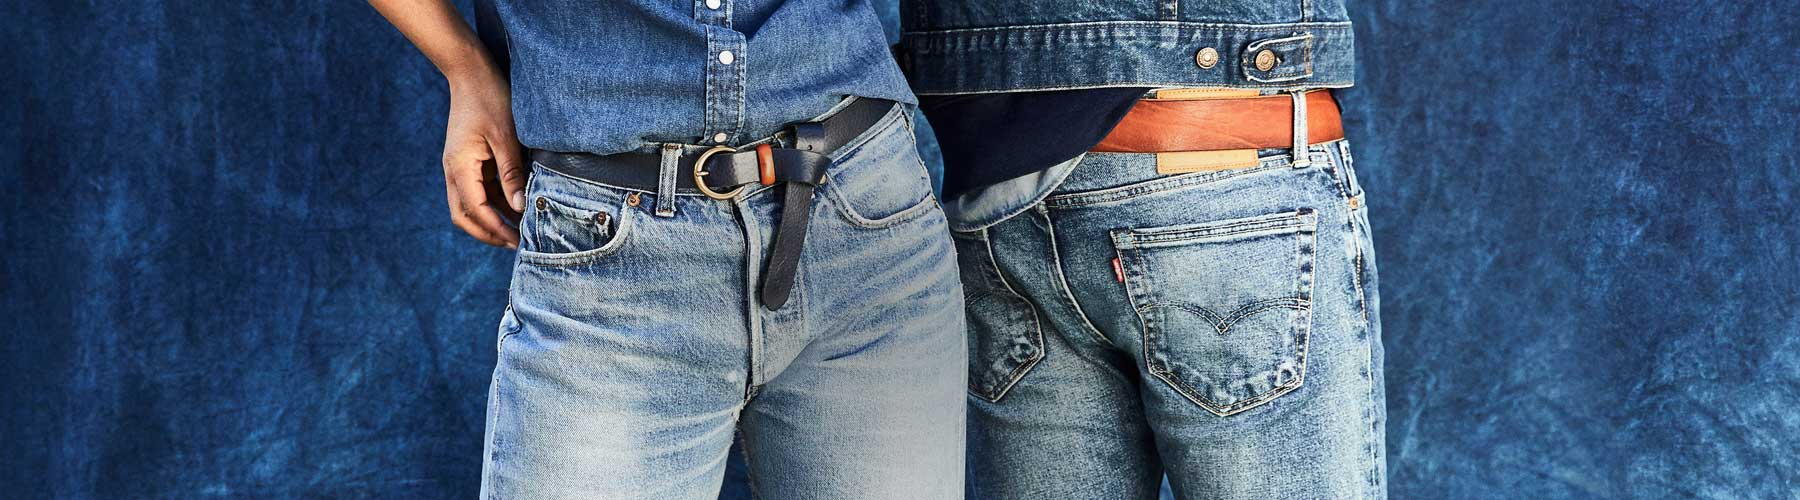 High Waisted Jeans Manufacturers in Delhi